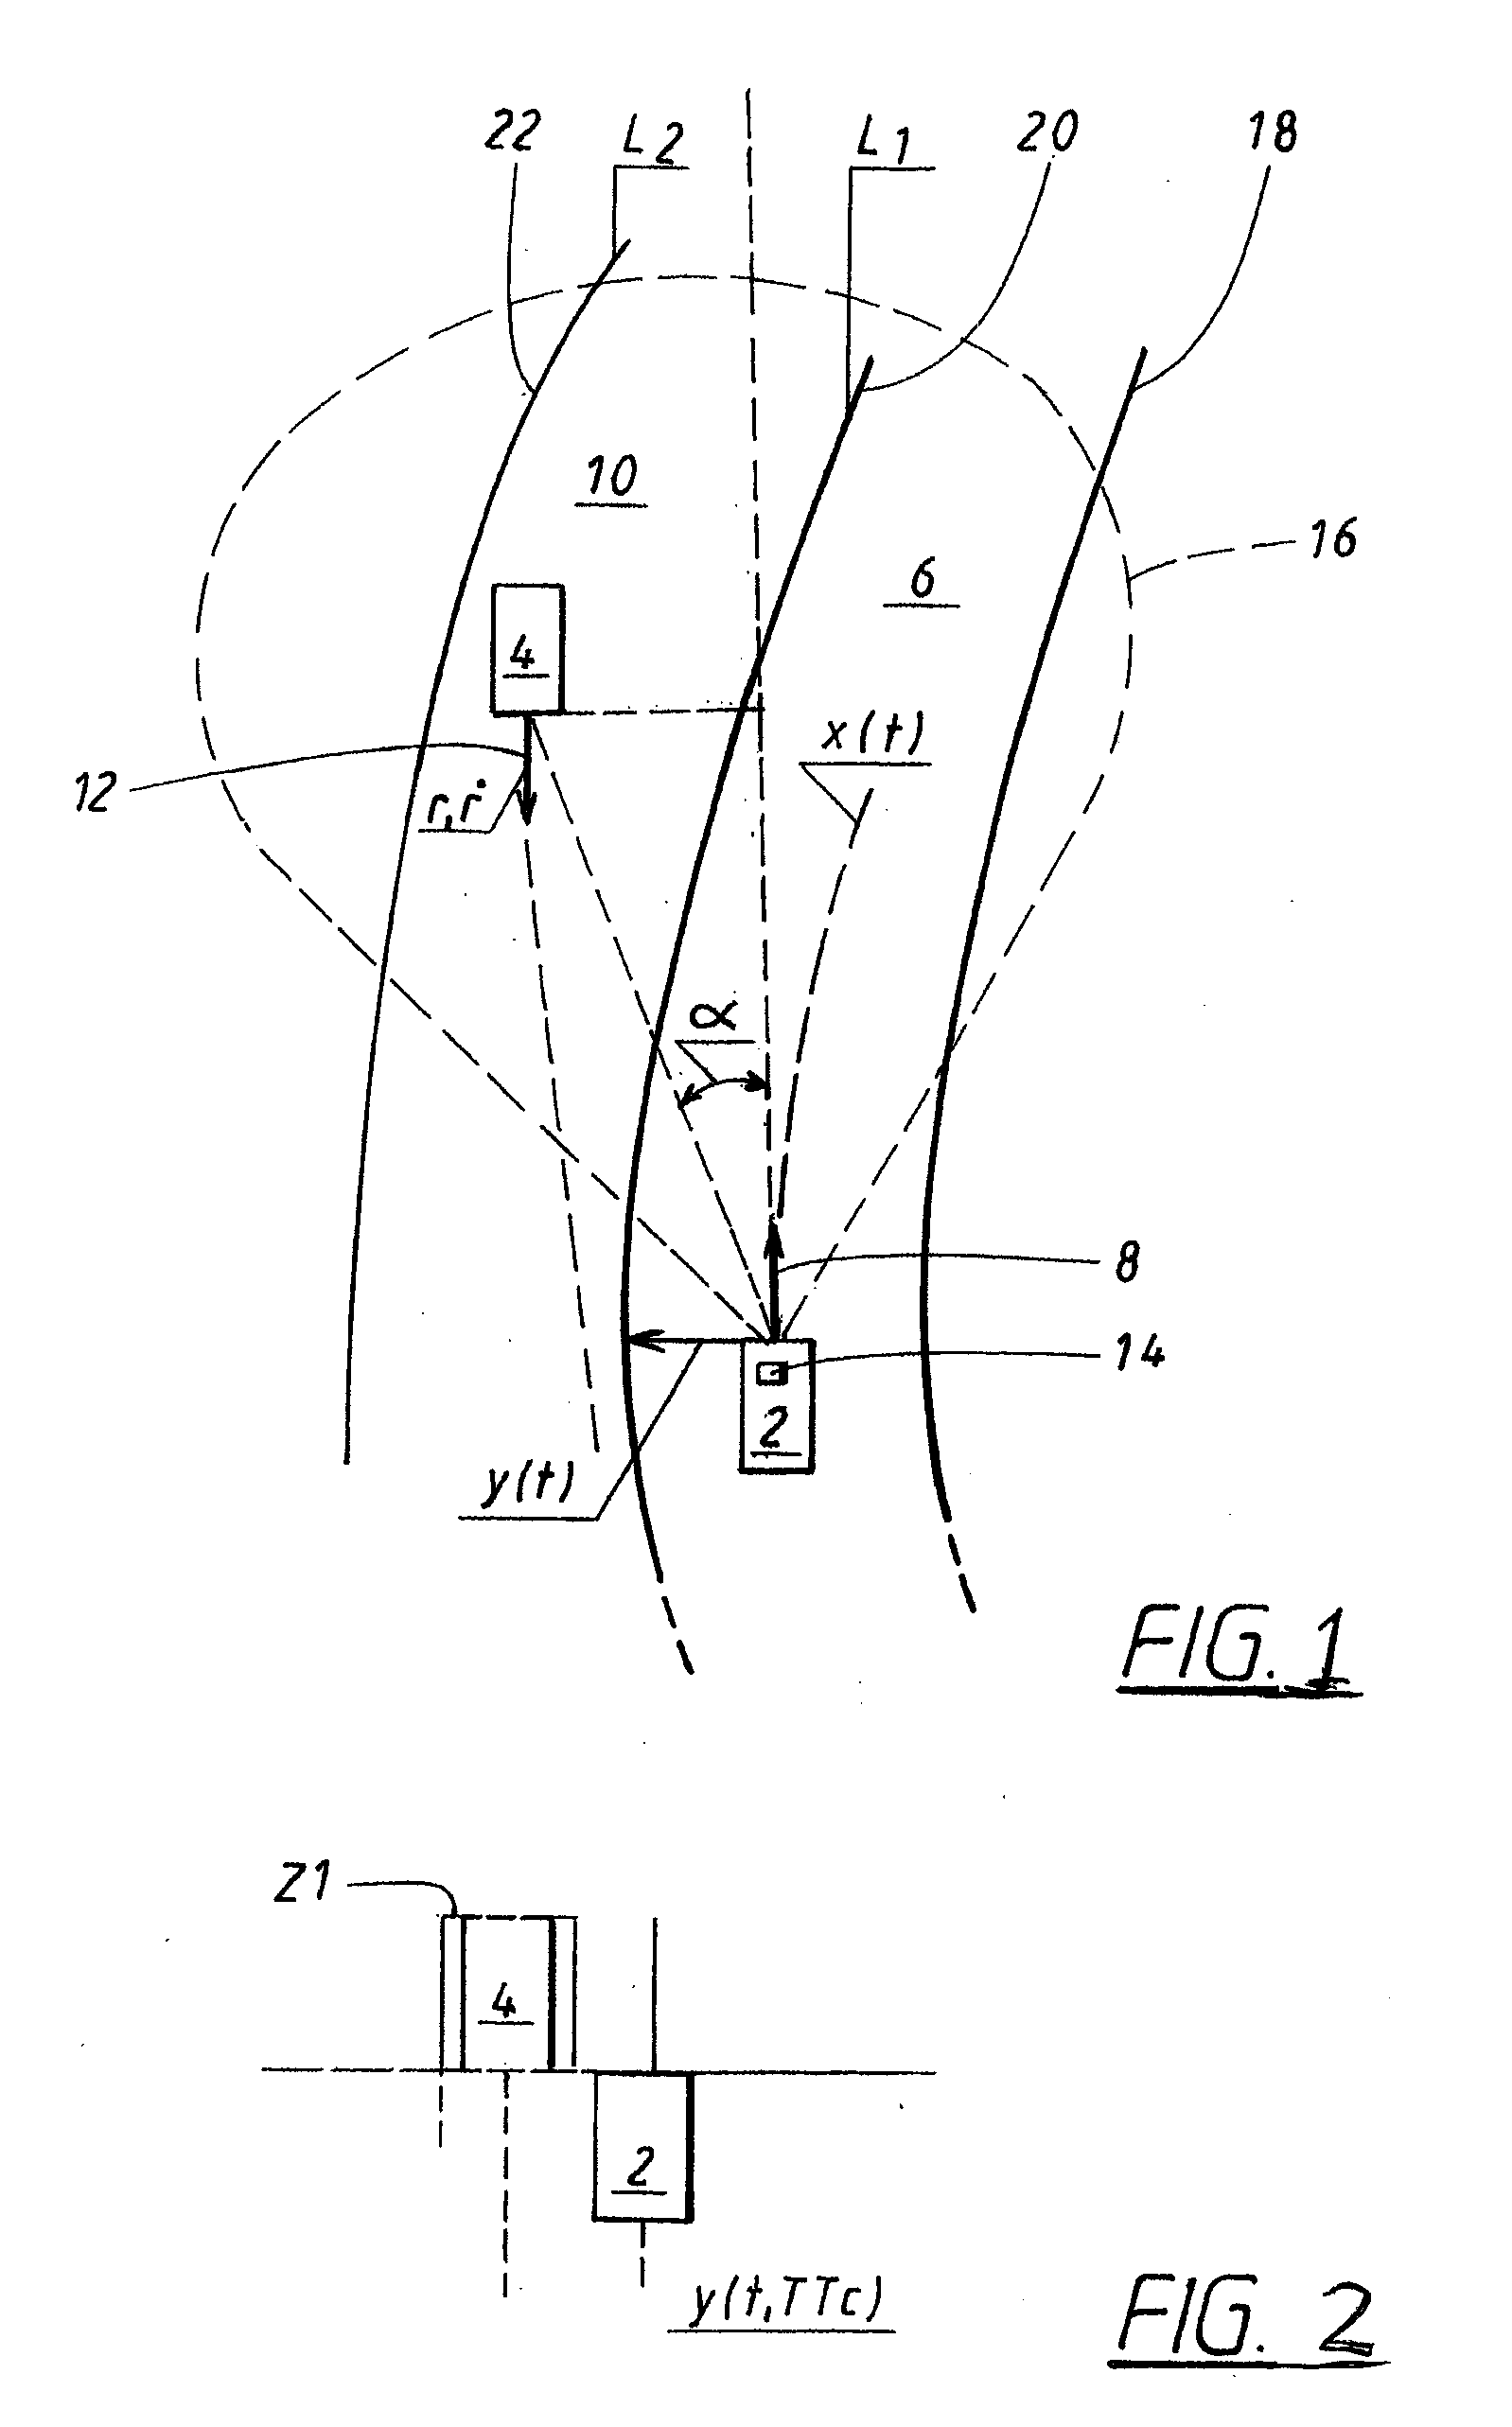 Method and system for collision course prediction and collision avoidance and mitigation